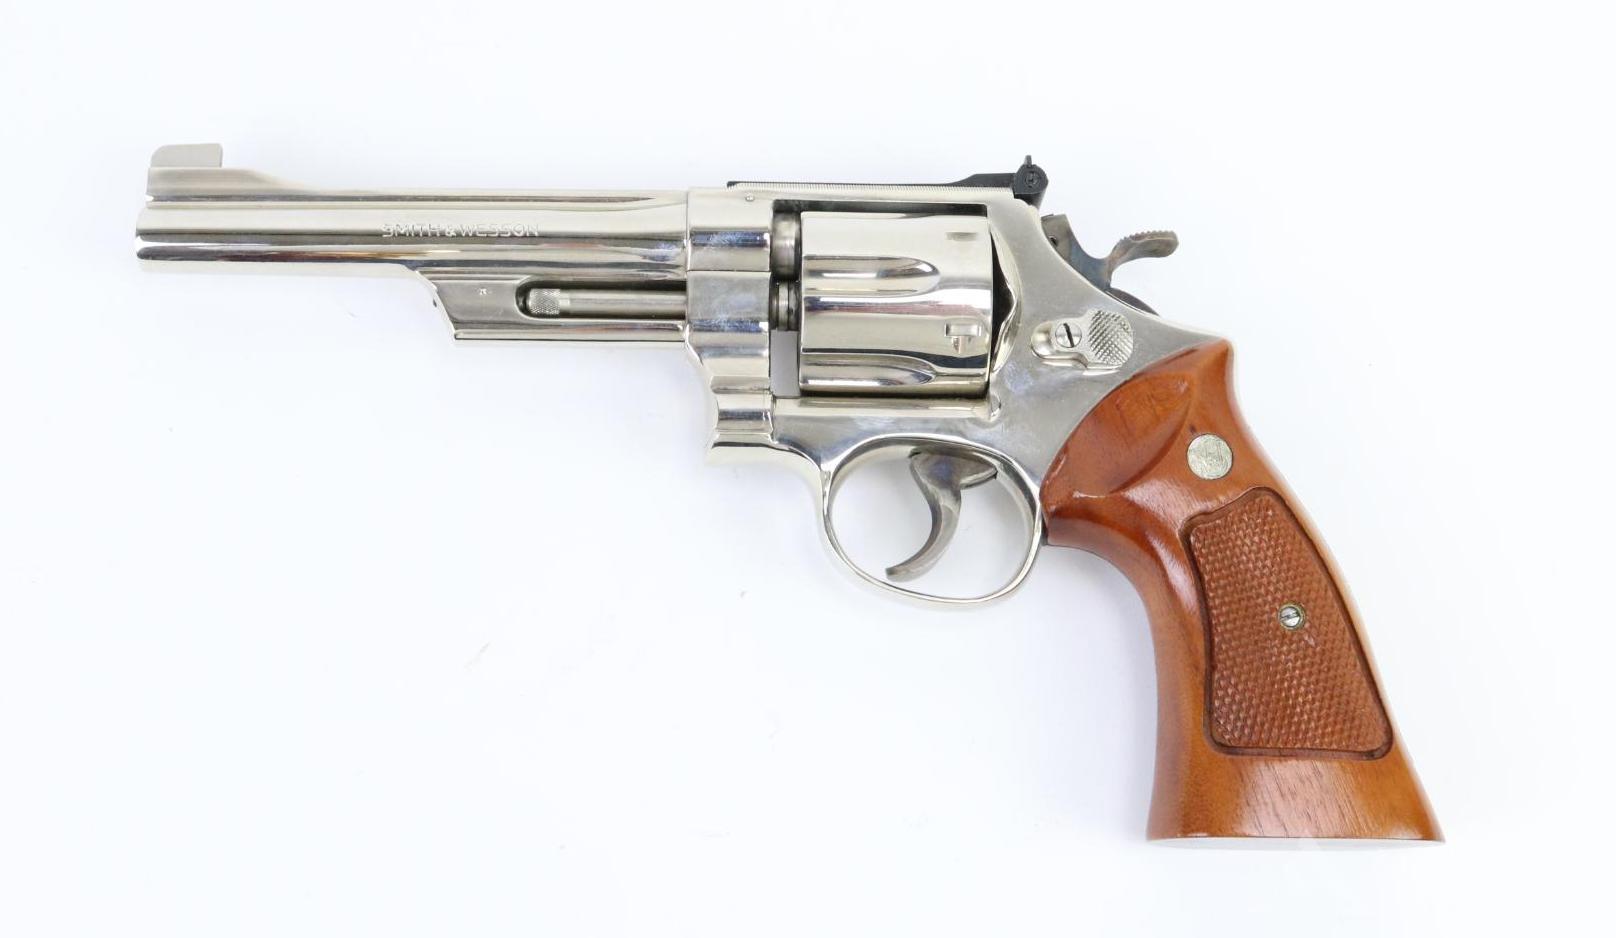 Smith & Wesson 27-2 double action revolver.